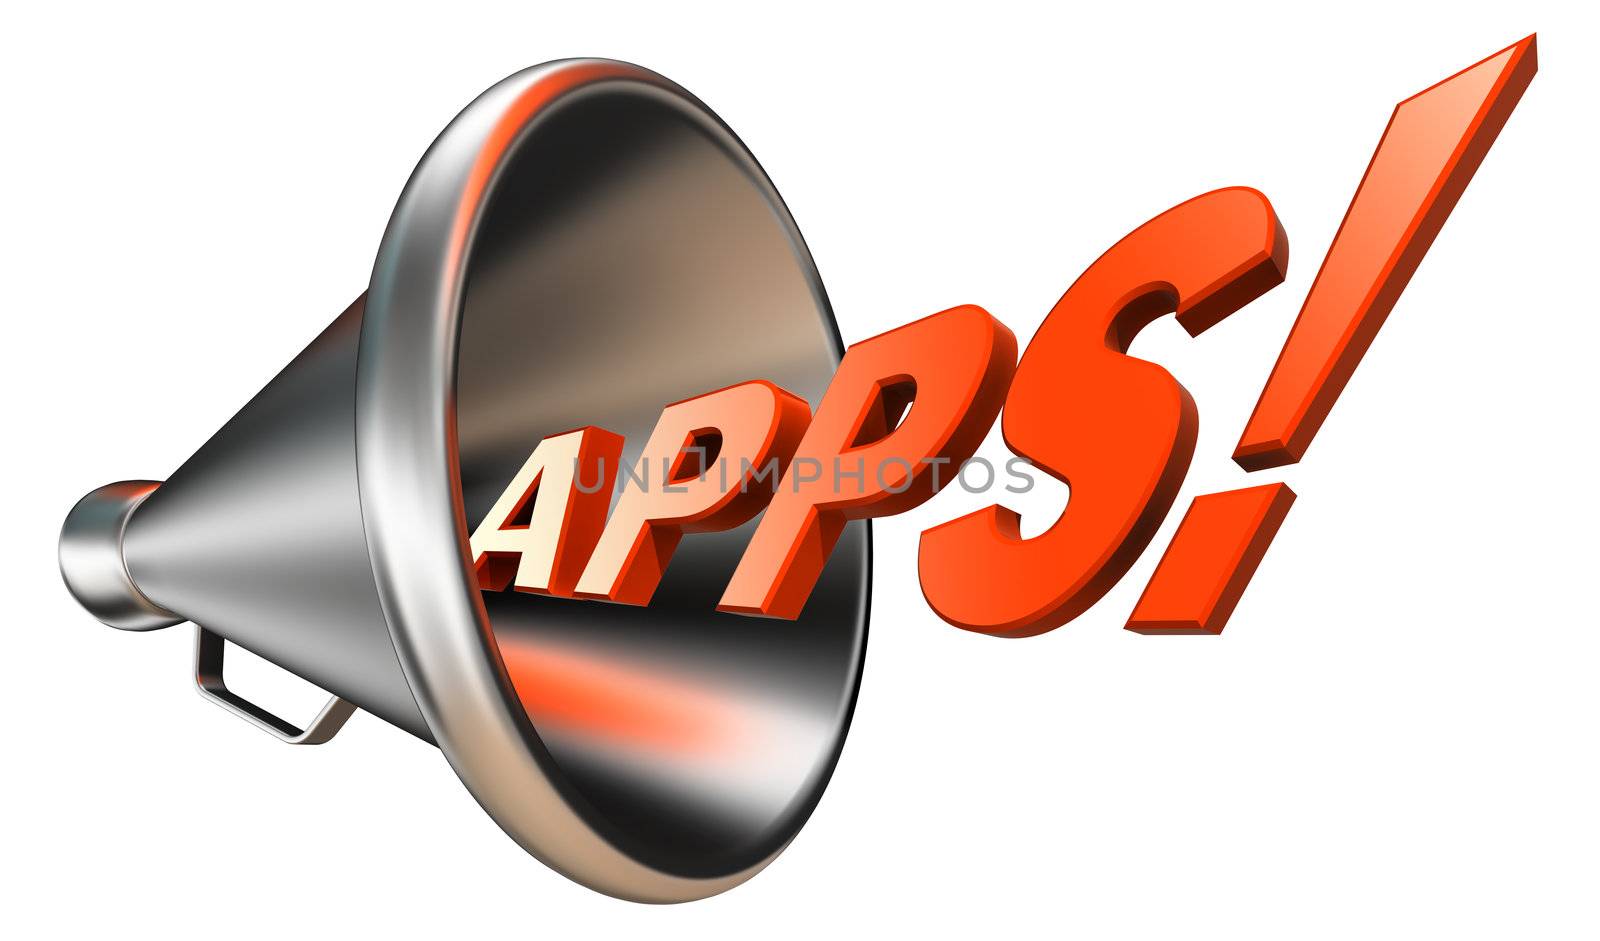 apps orange word in megaphone on white background. clipping path included 